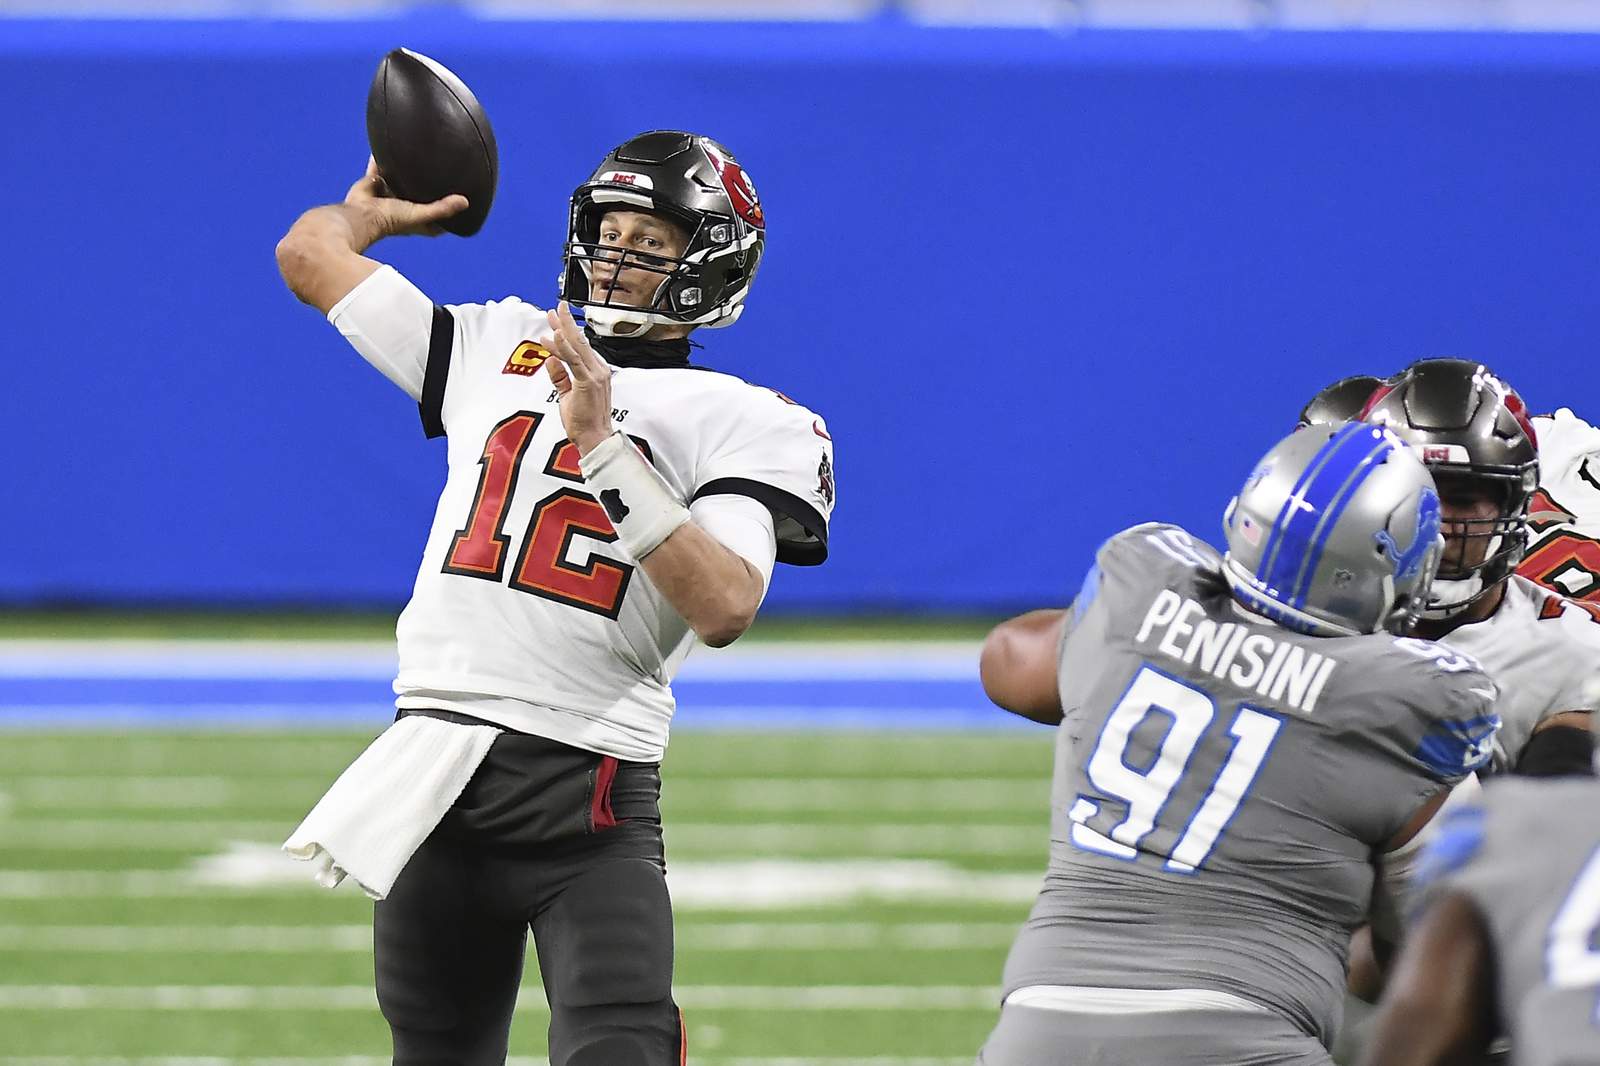 Brady-led Bucs top Lions 47-7 to end 13-year playoff drought